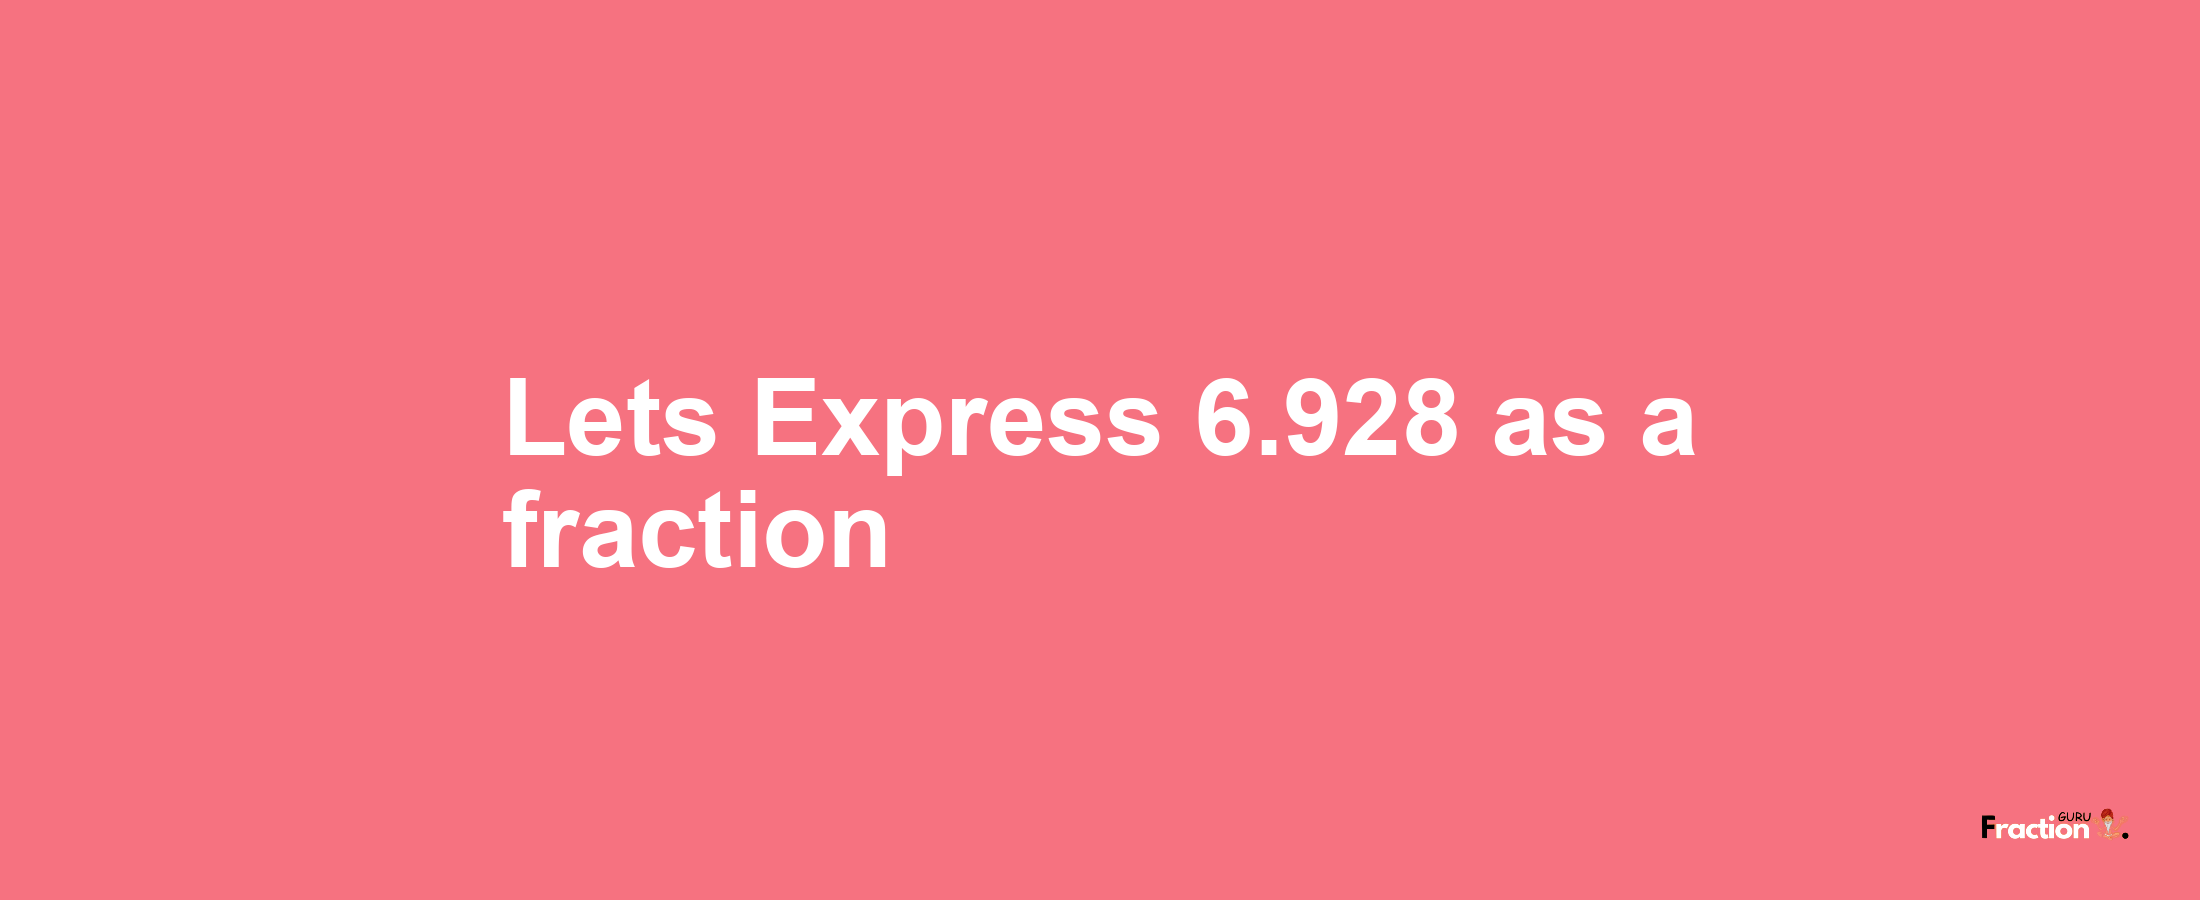 Lets Express 6.928 as afraction